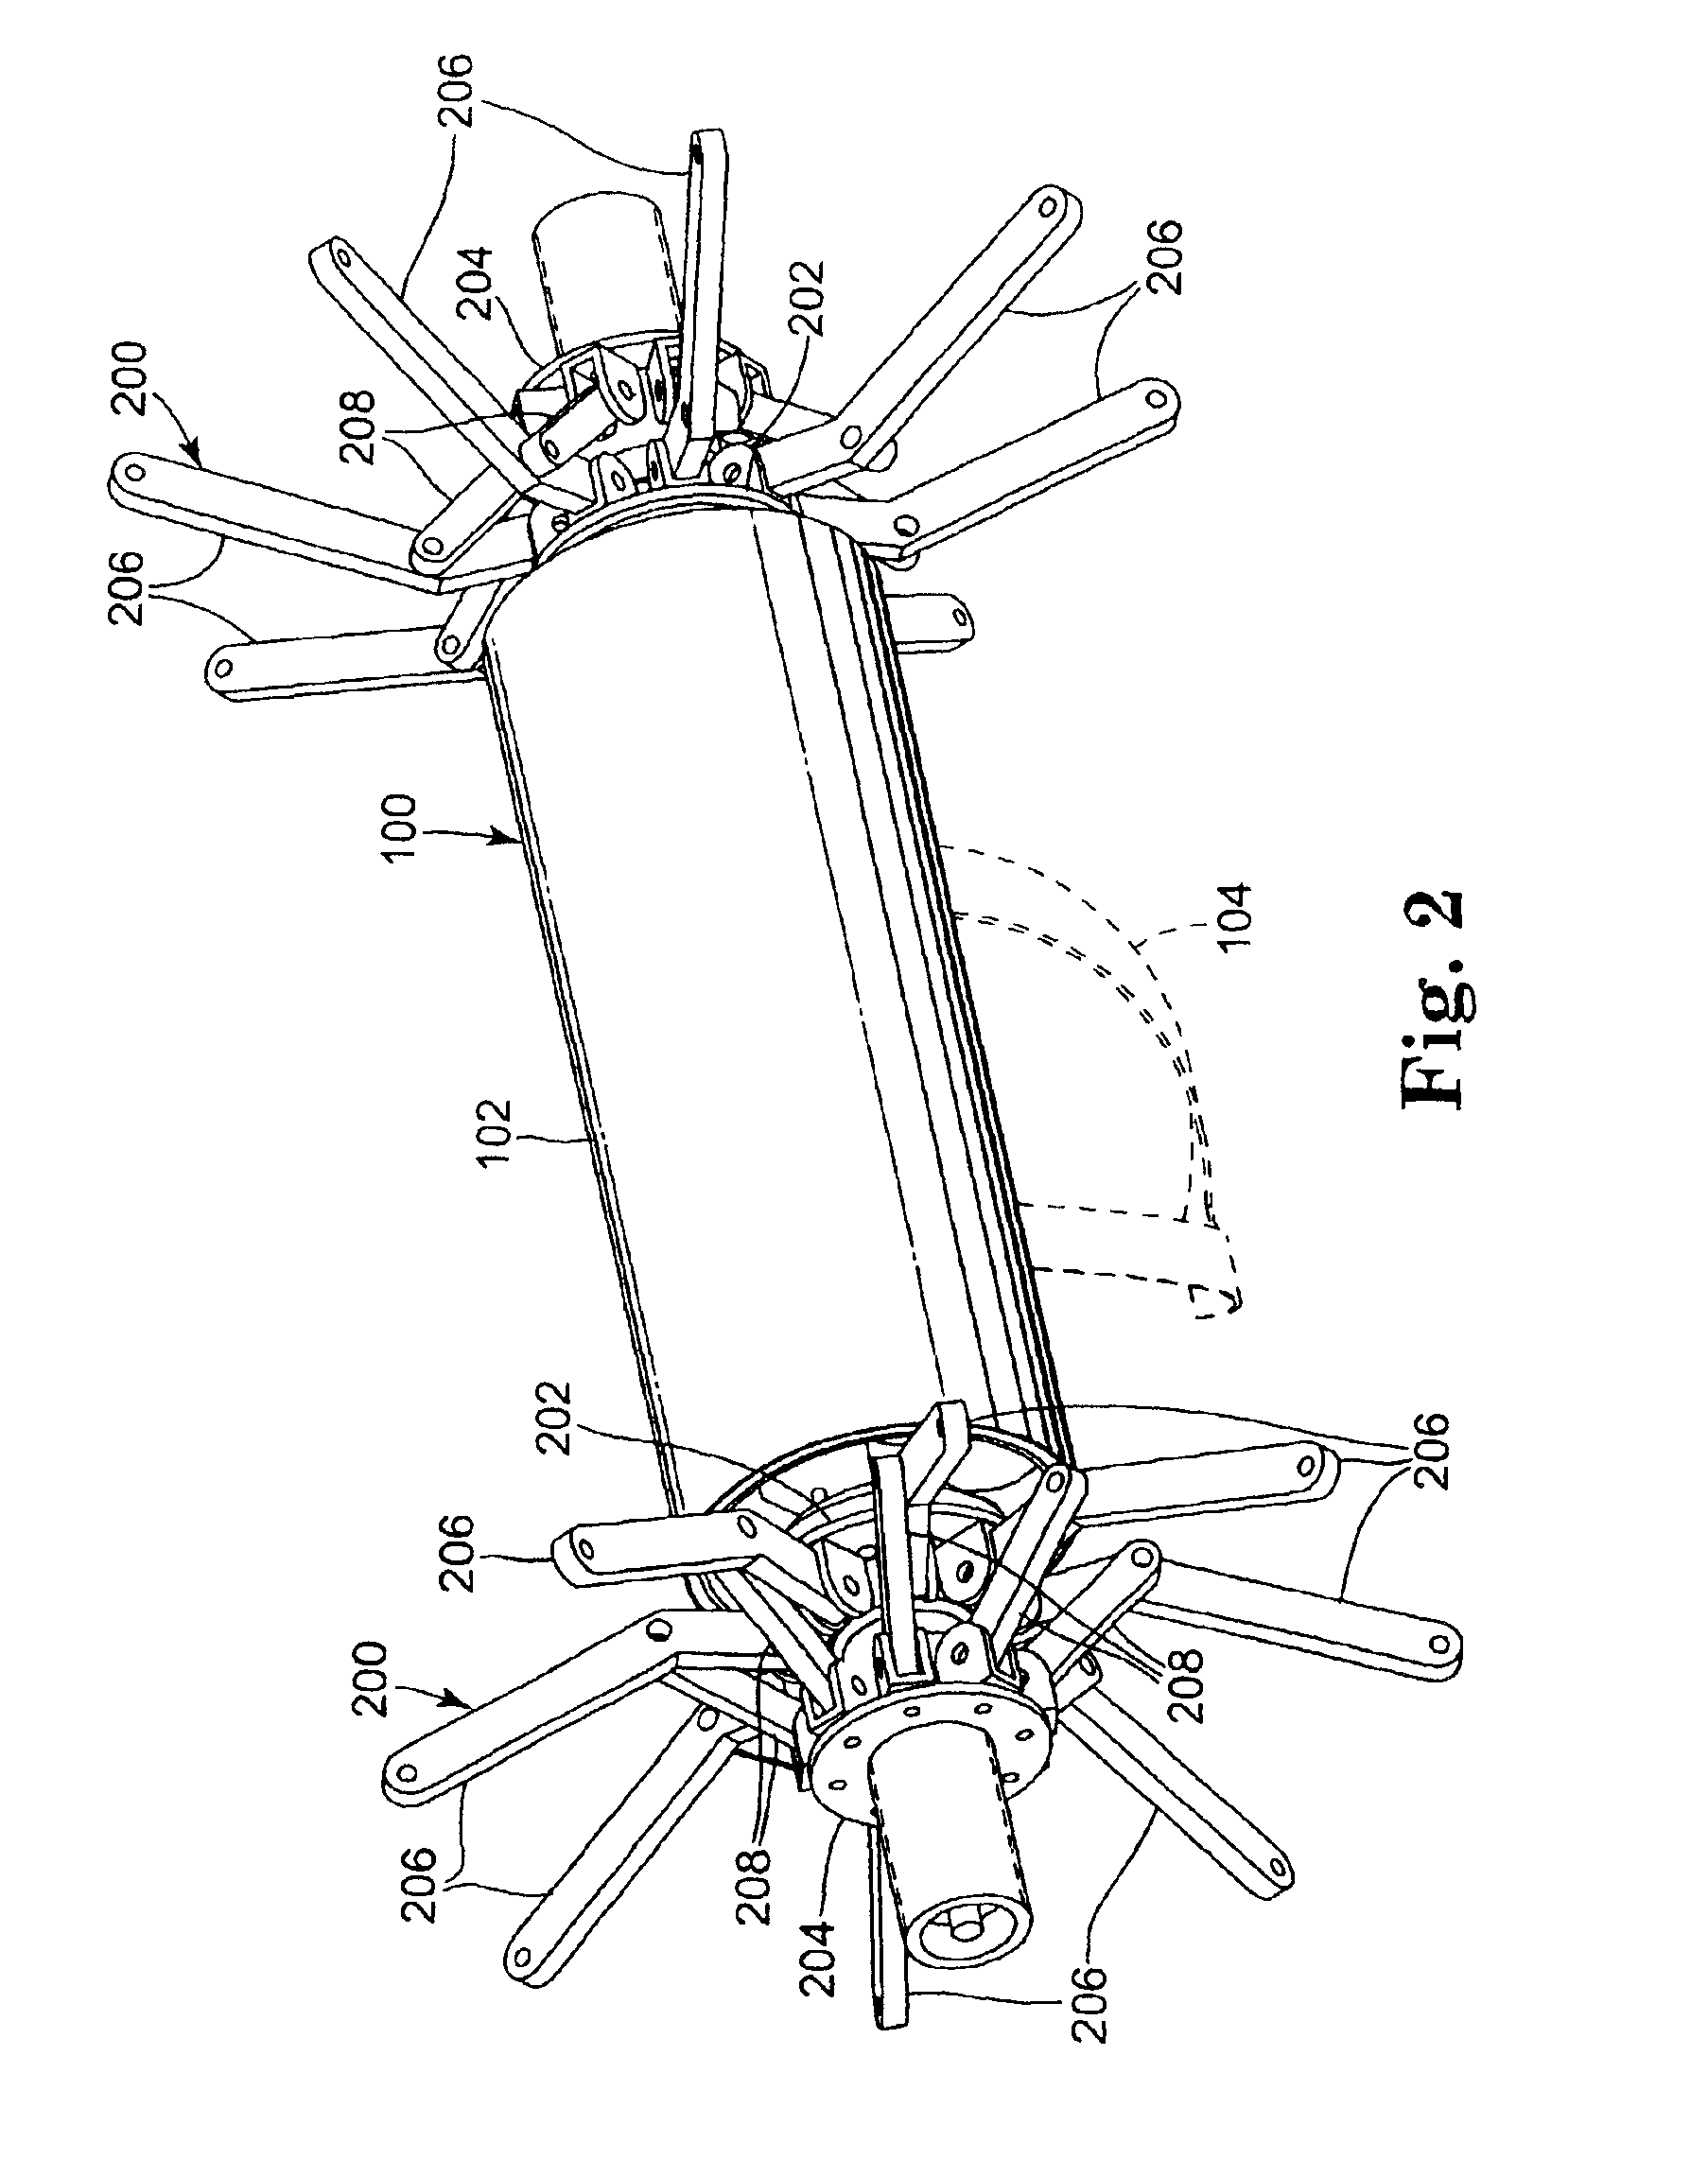 Adjustable diameter wheel assembly, and methods and vehicles using same